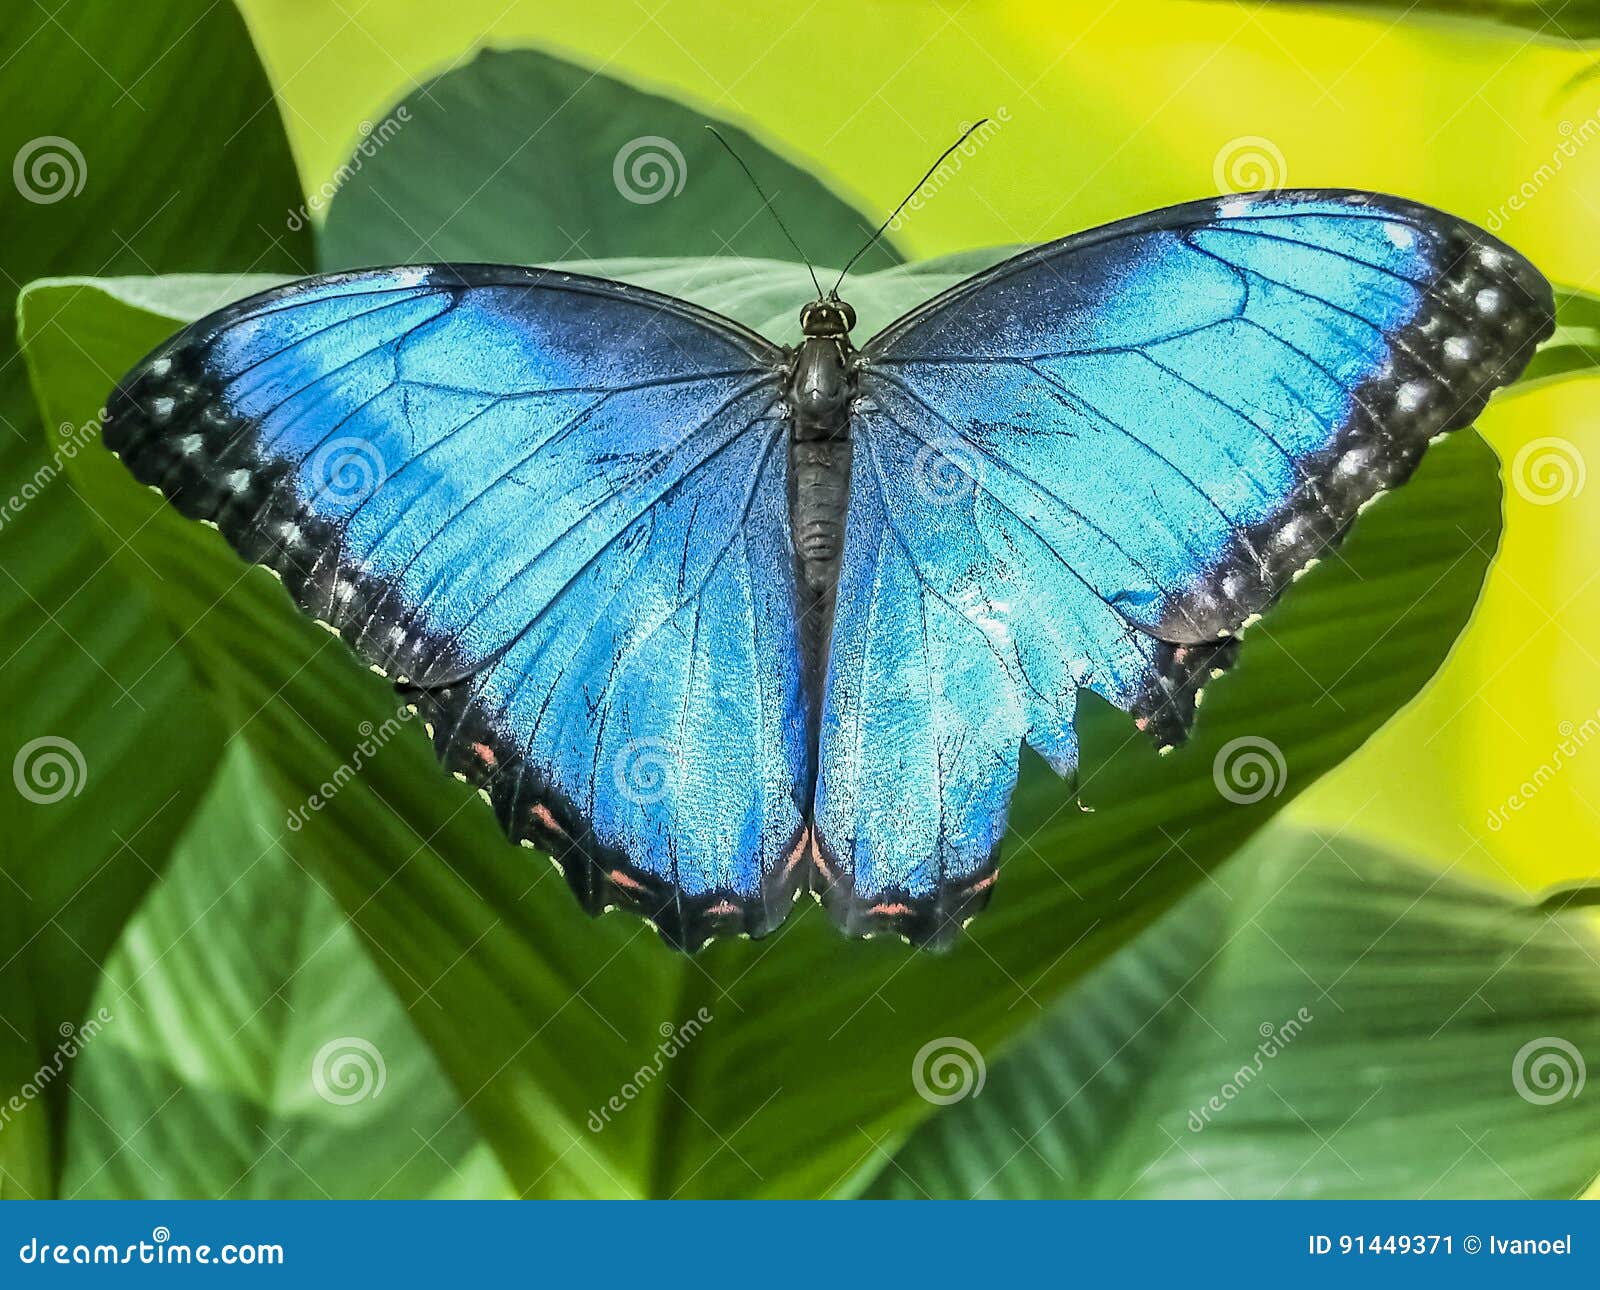 a beautiful blue morpho butterfly perched on a leaf